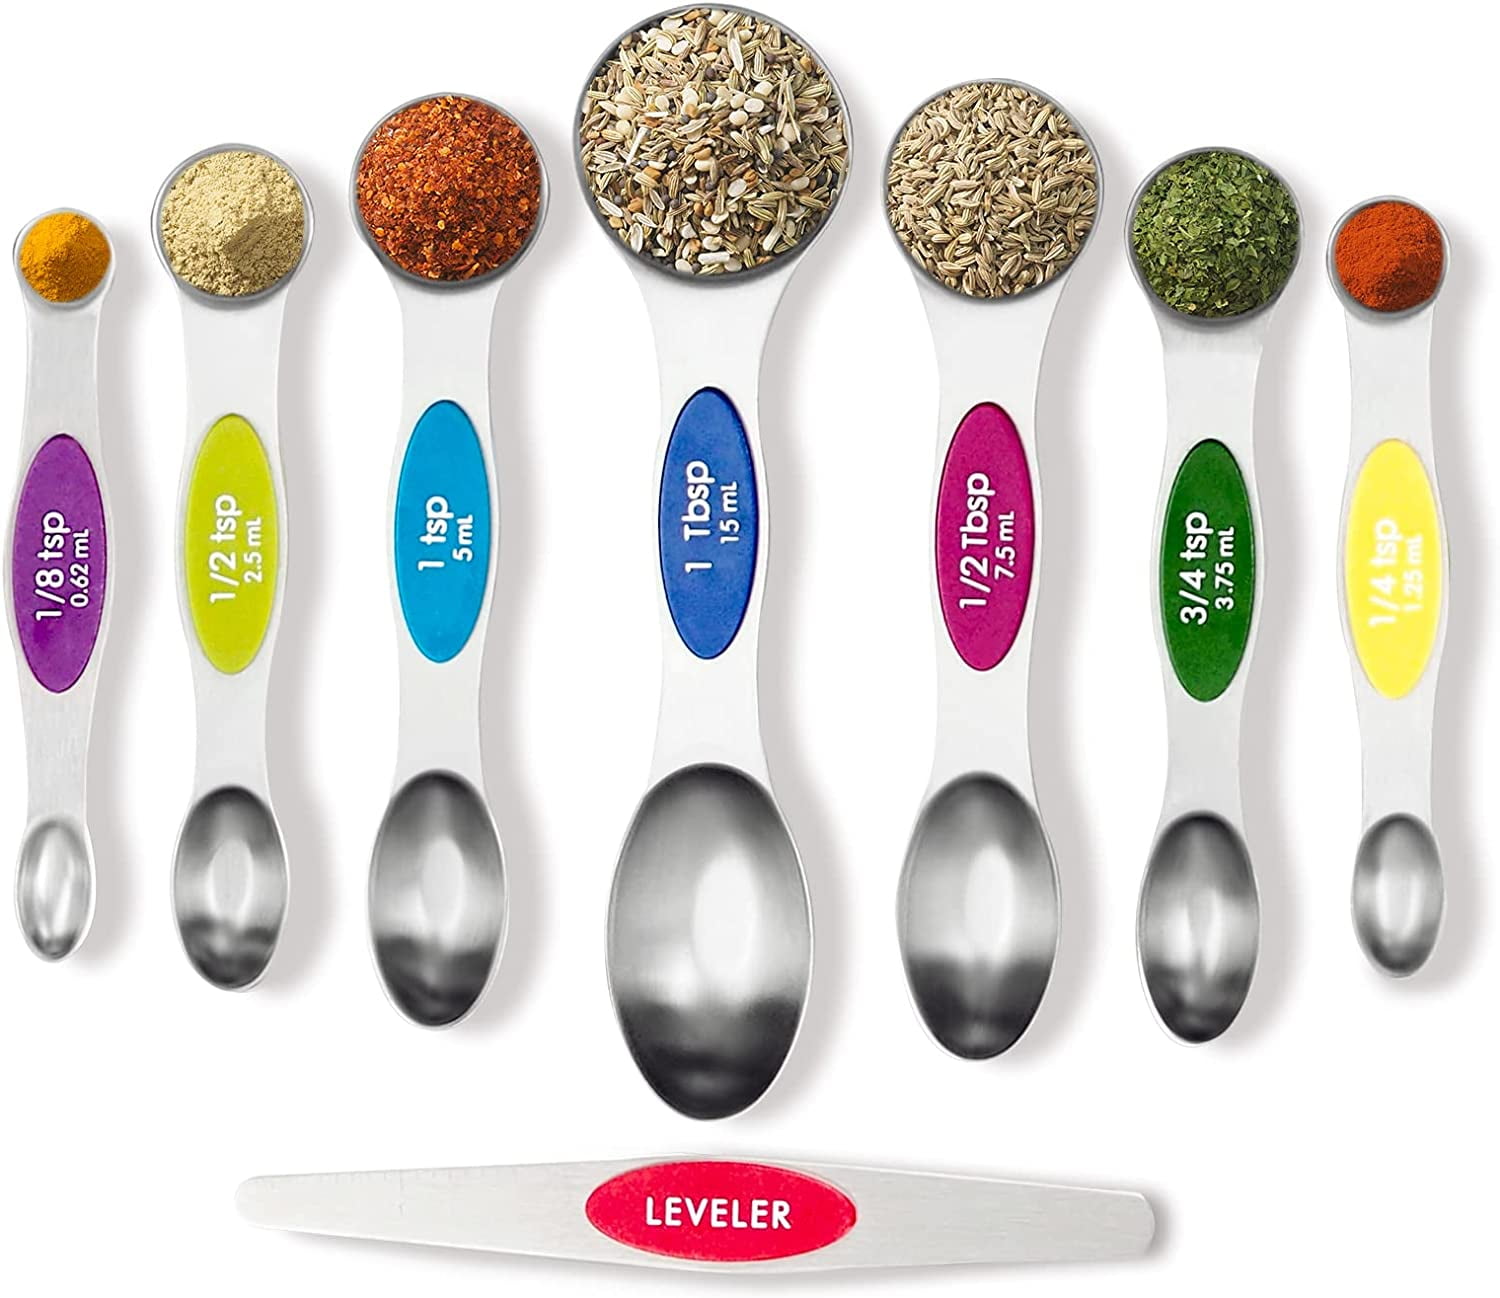  Spring Chef Magnetic Measuring Spoons Set, Dual Sided,  Stainless Steel, Fits in Spice Jars, Pistachio, Set of 8: Home & Kitchen